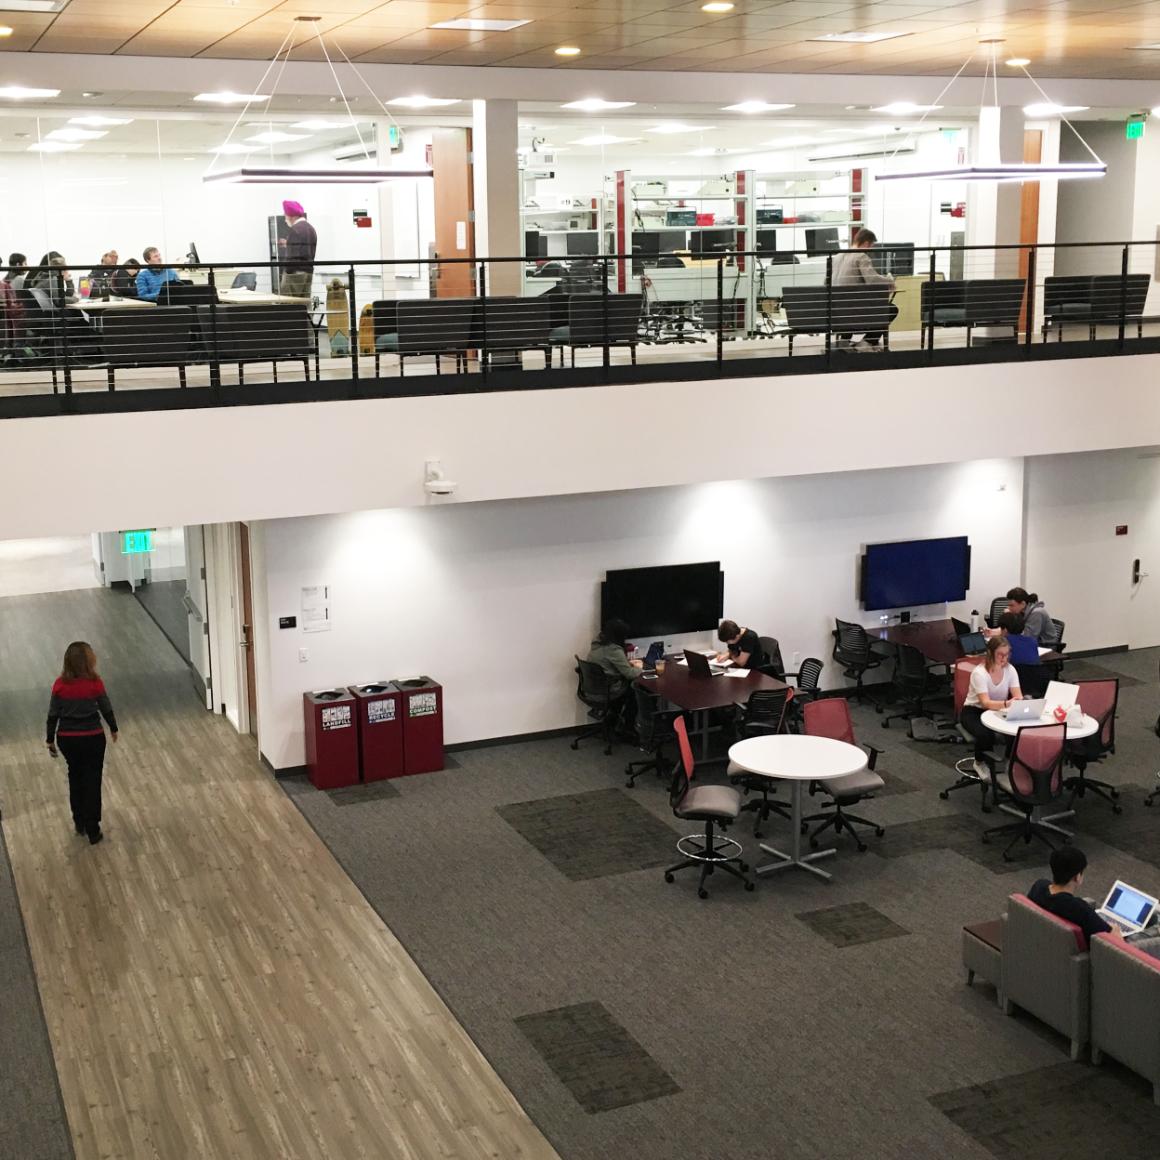 Classroom, lab, study, and collaboration space coexist nicely in Engineering's new digs. image link to story